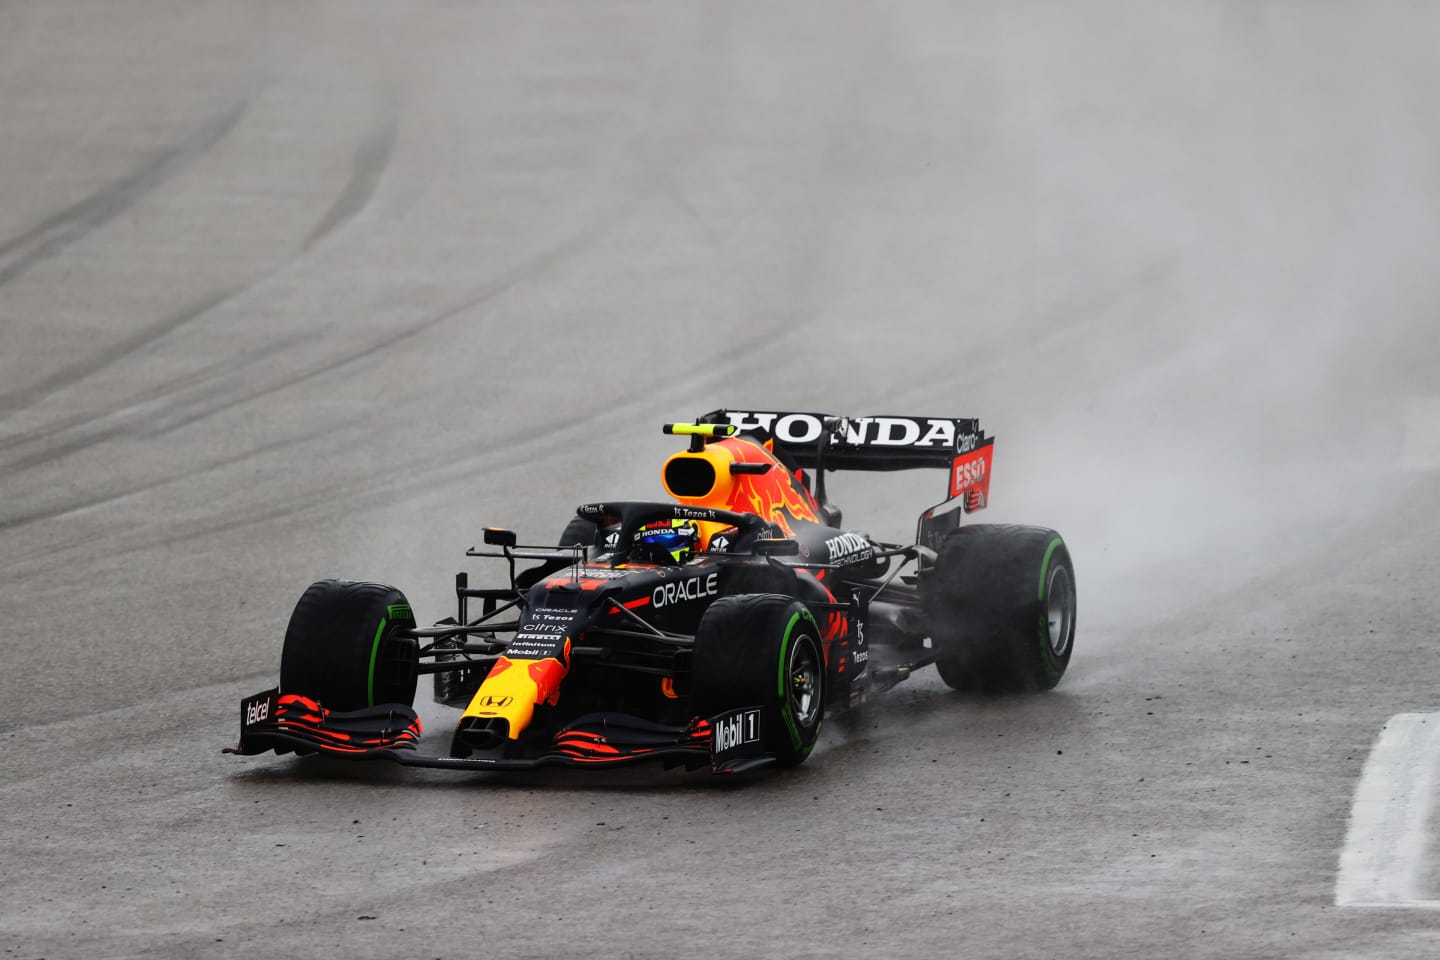 SOCHI, RUSSIA - SEPTEMBER 26: Sergio Perez of Mexico driving the (11) Red Bull Racing RB16B Honda during the F1 Grand Prix of Russia at Sochi Autodrom on September 26, 2021 in Sochi, Russia. (Photo by Bryn Lennon/Getty Images)